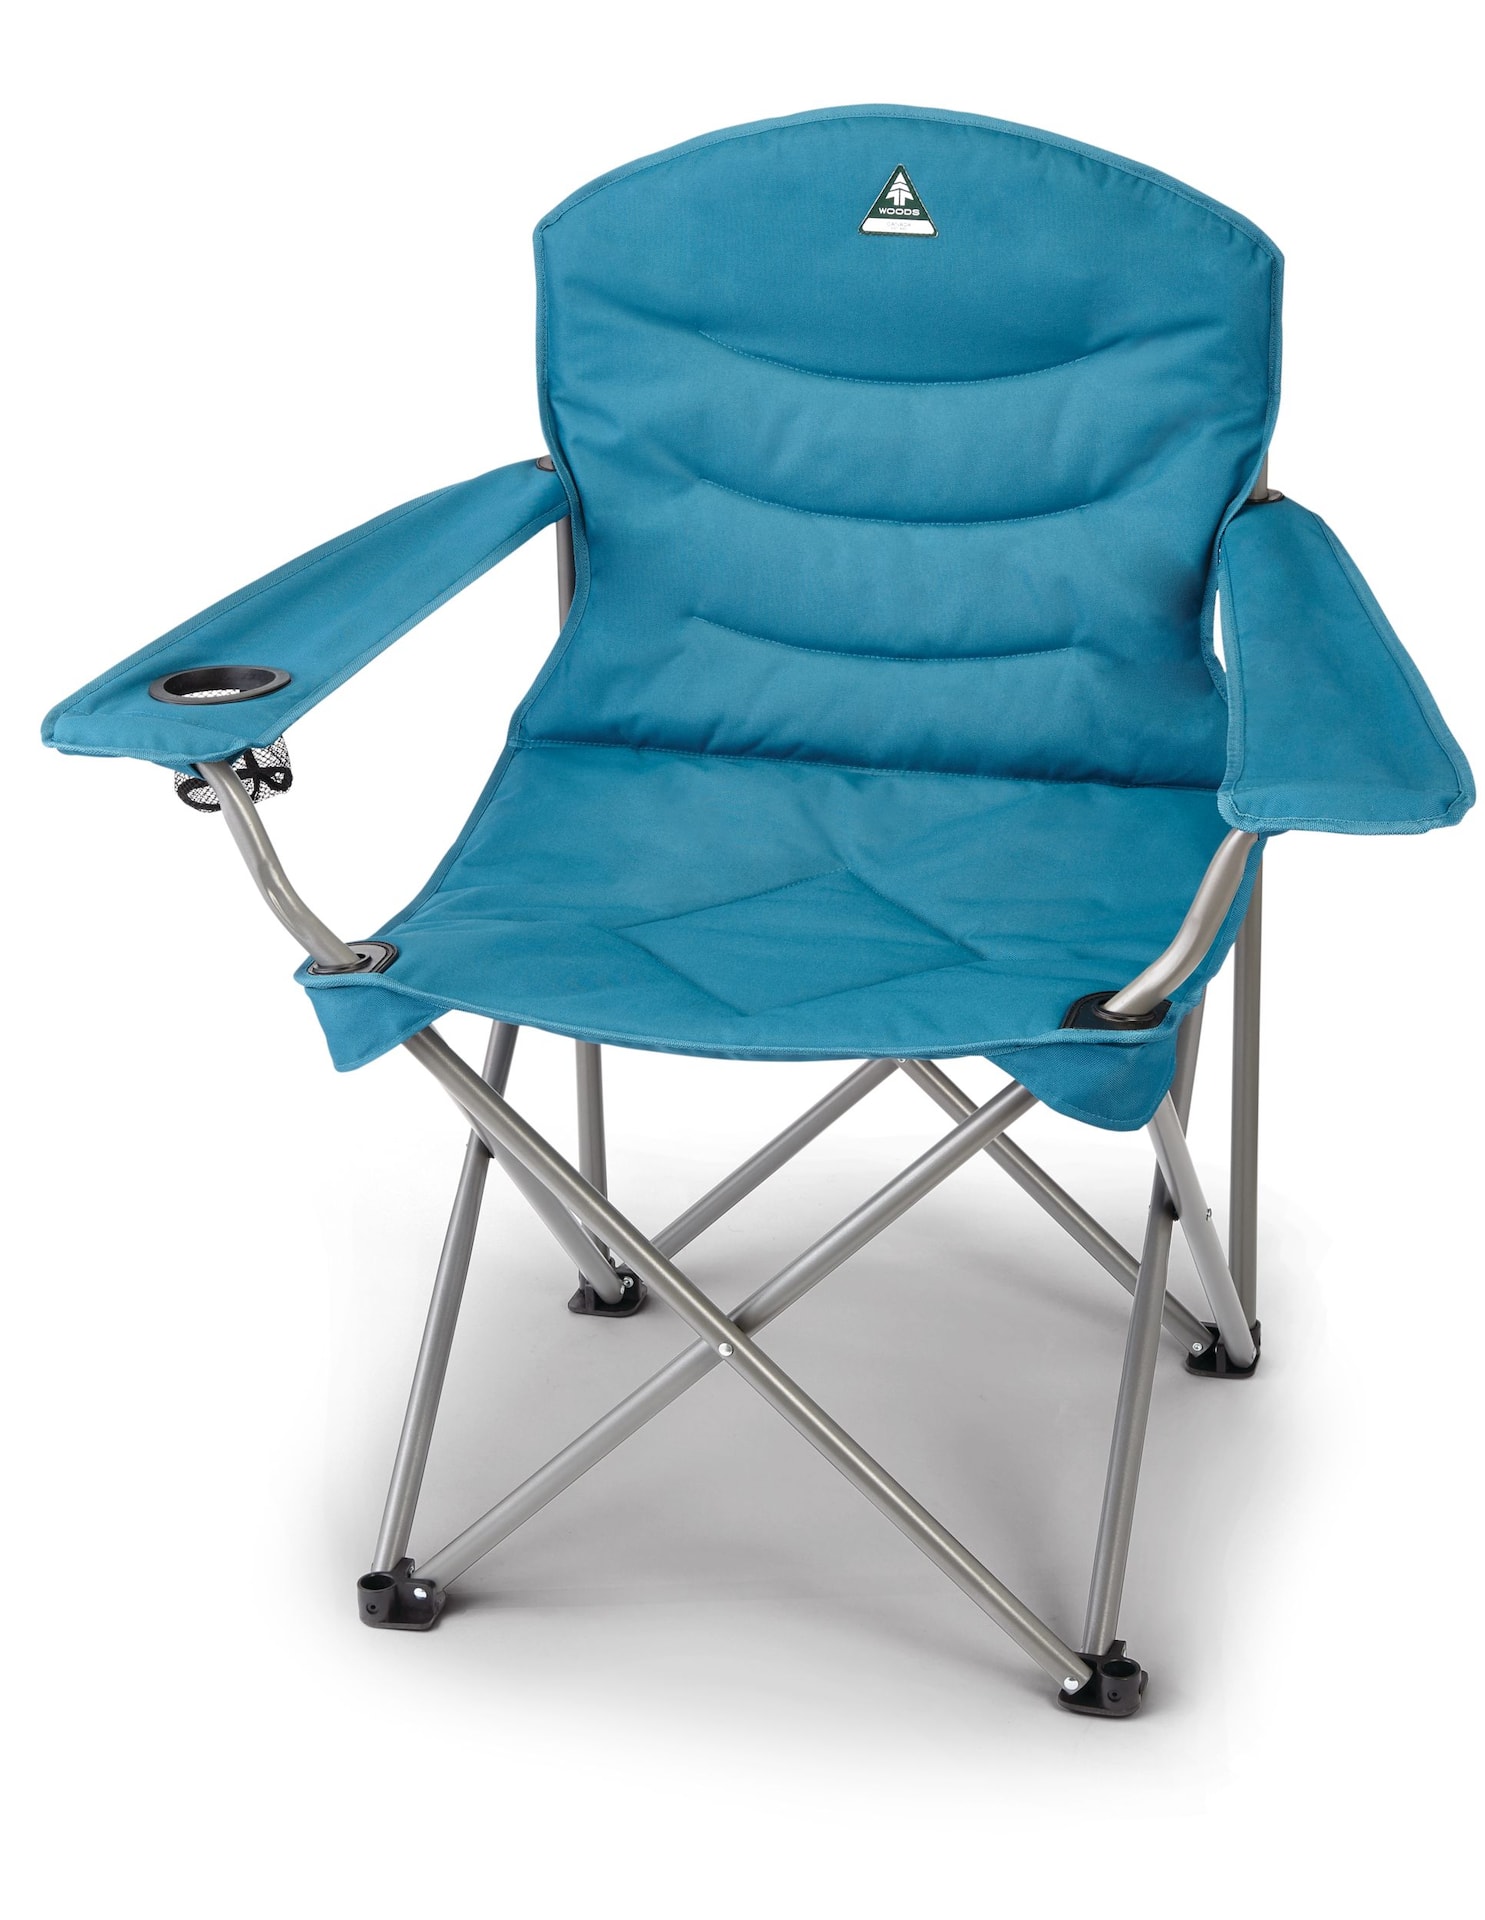 Fishing Chair Portable Seat Backpacking Chair Folding Camping Chairs Canopy  Chair With Cup Holder Fishing Beach Picnic